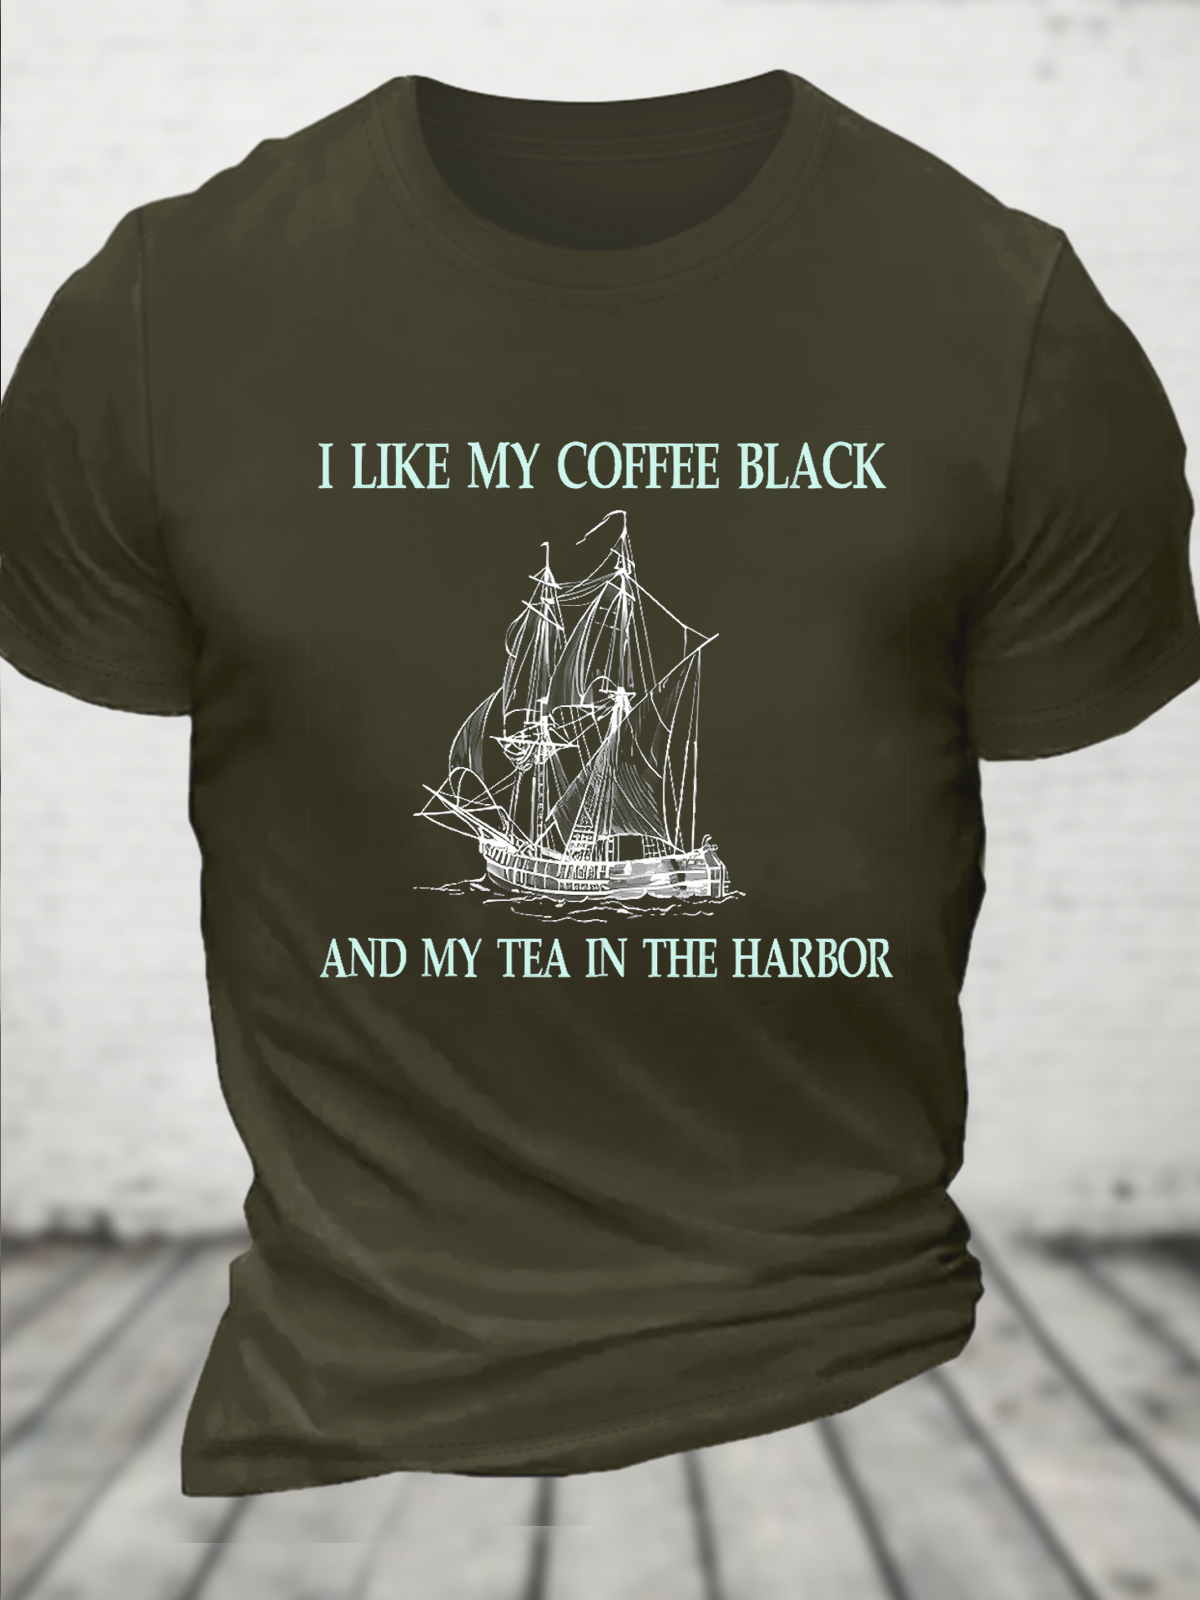 Cotton I Like My Coffee Black And Tea In The Harbor Casual Crew Neck Loose T-Shirt